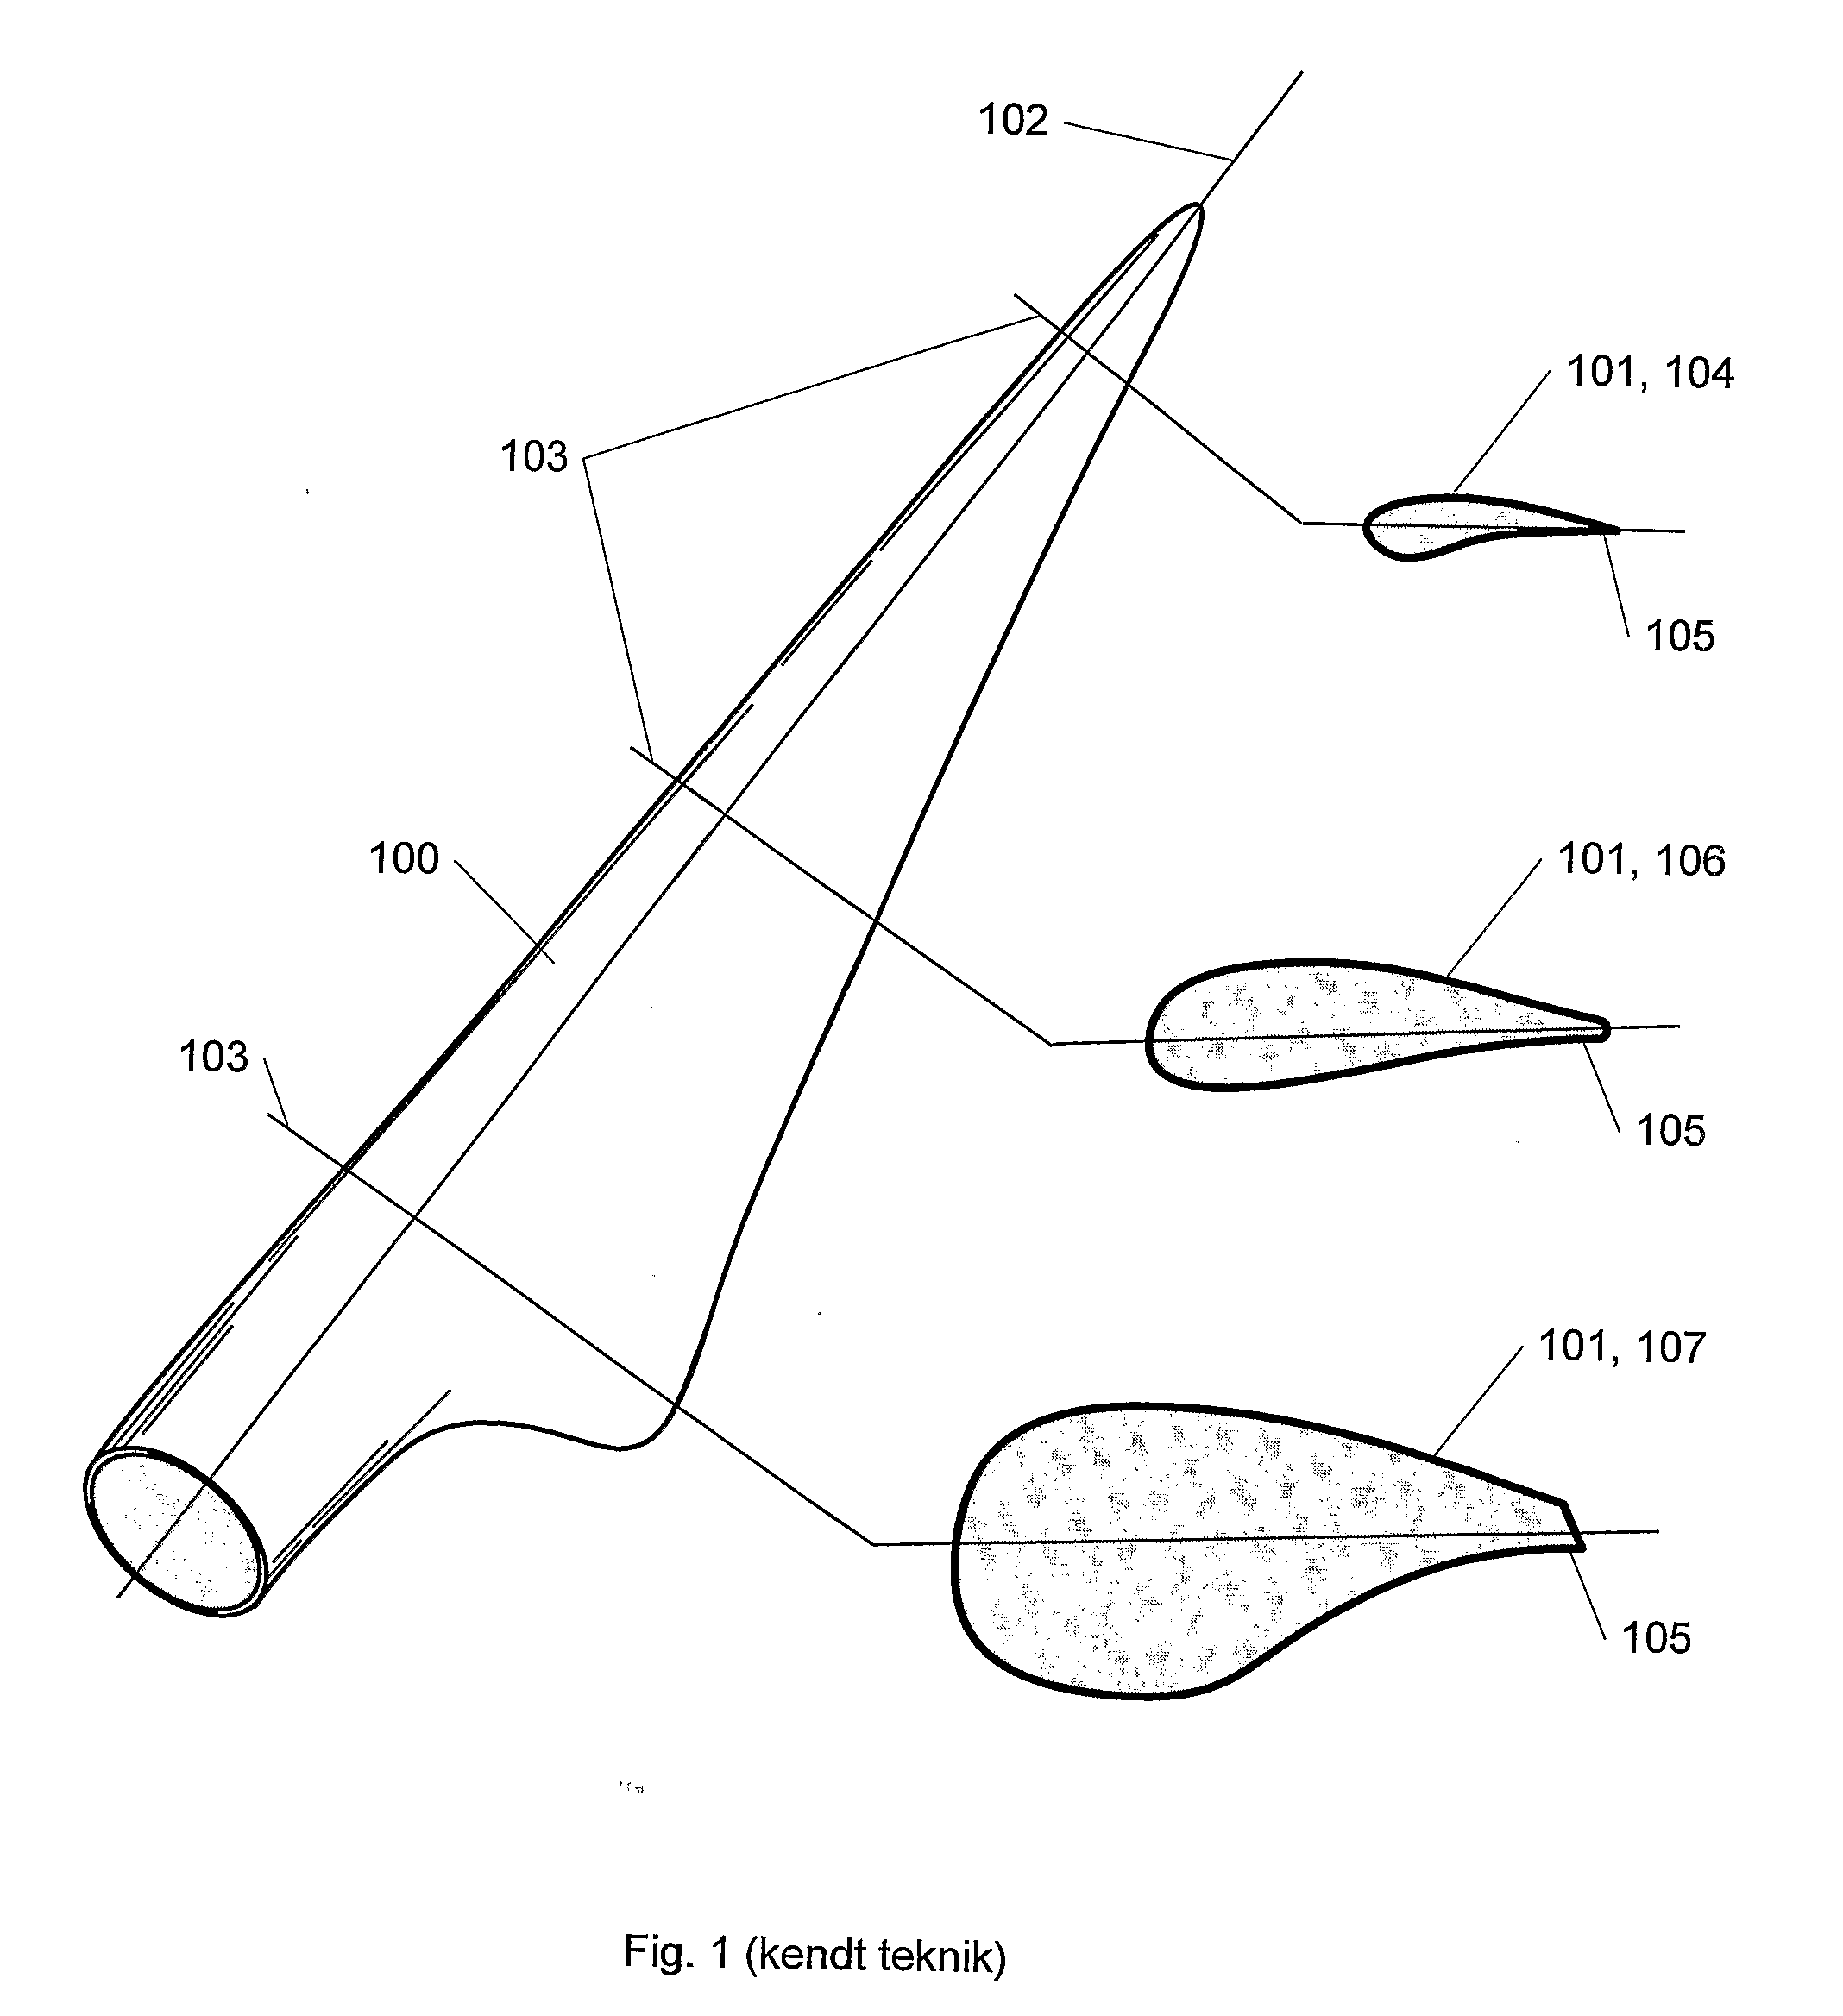 Airfoil Family for a Blade of a Wind Turbine